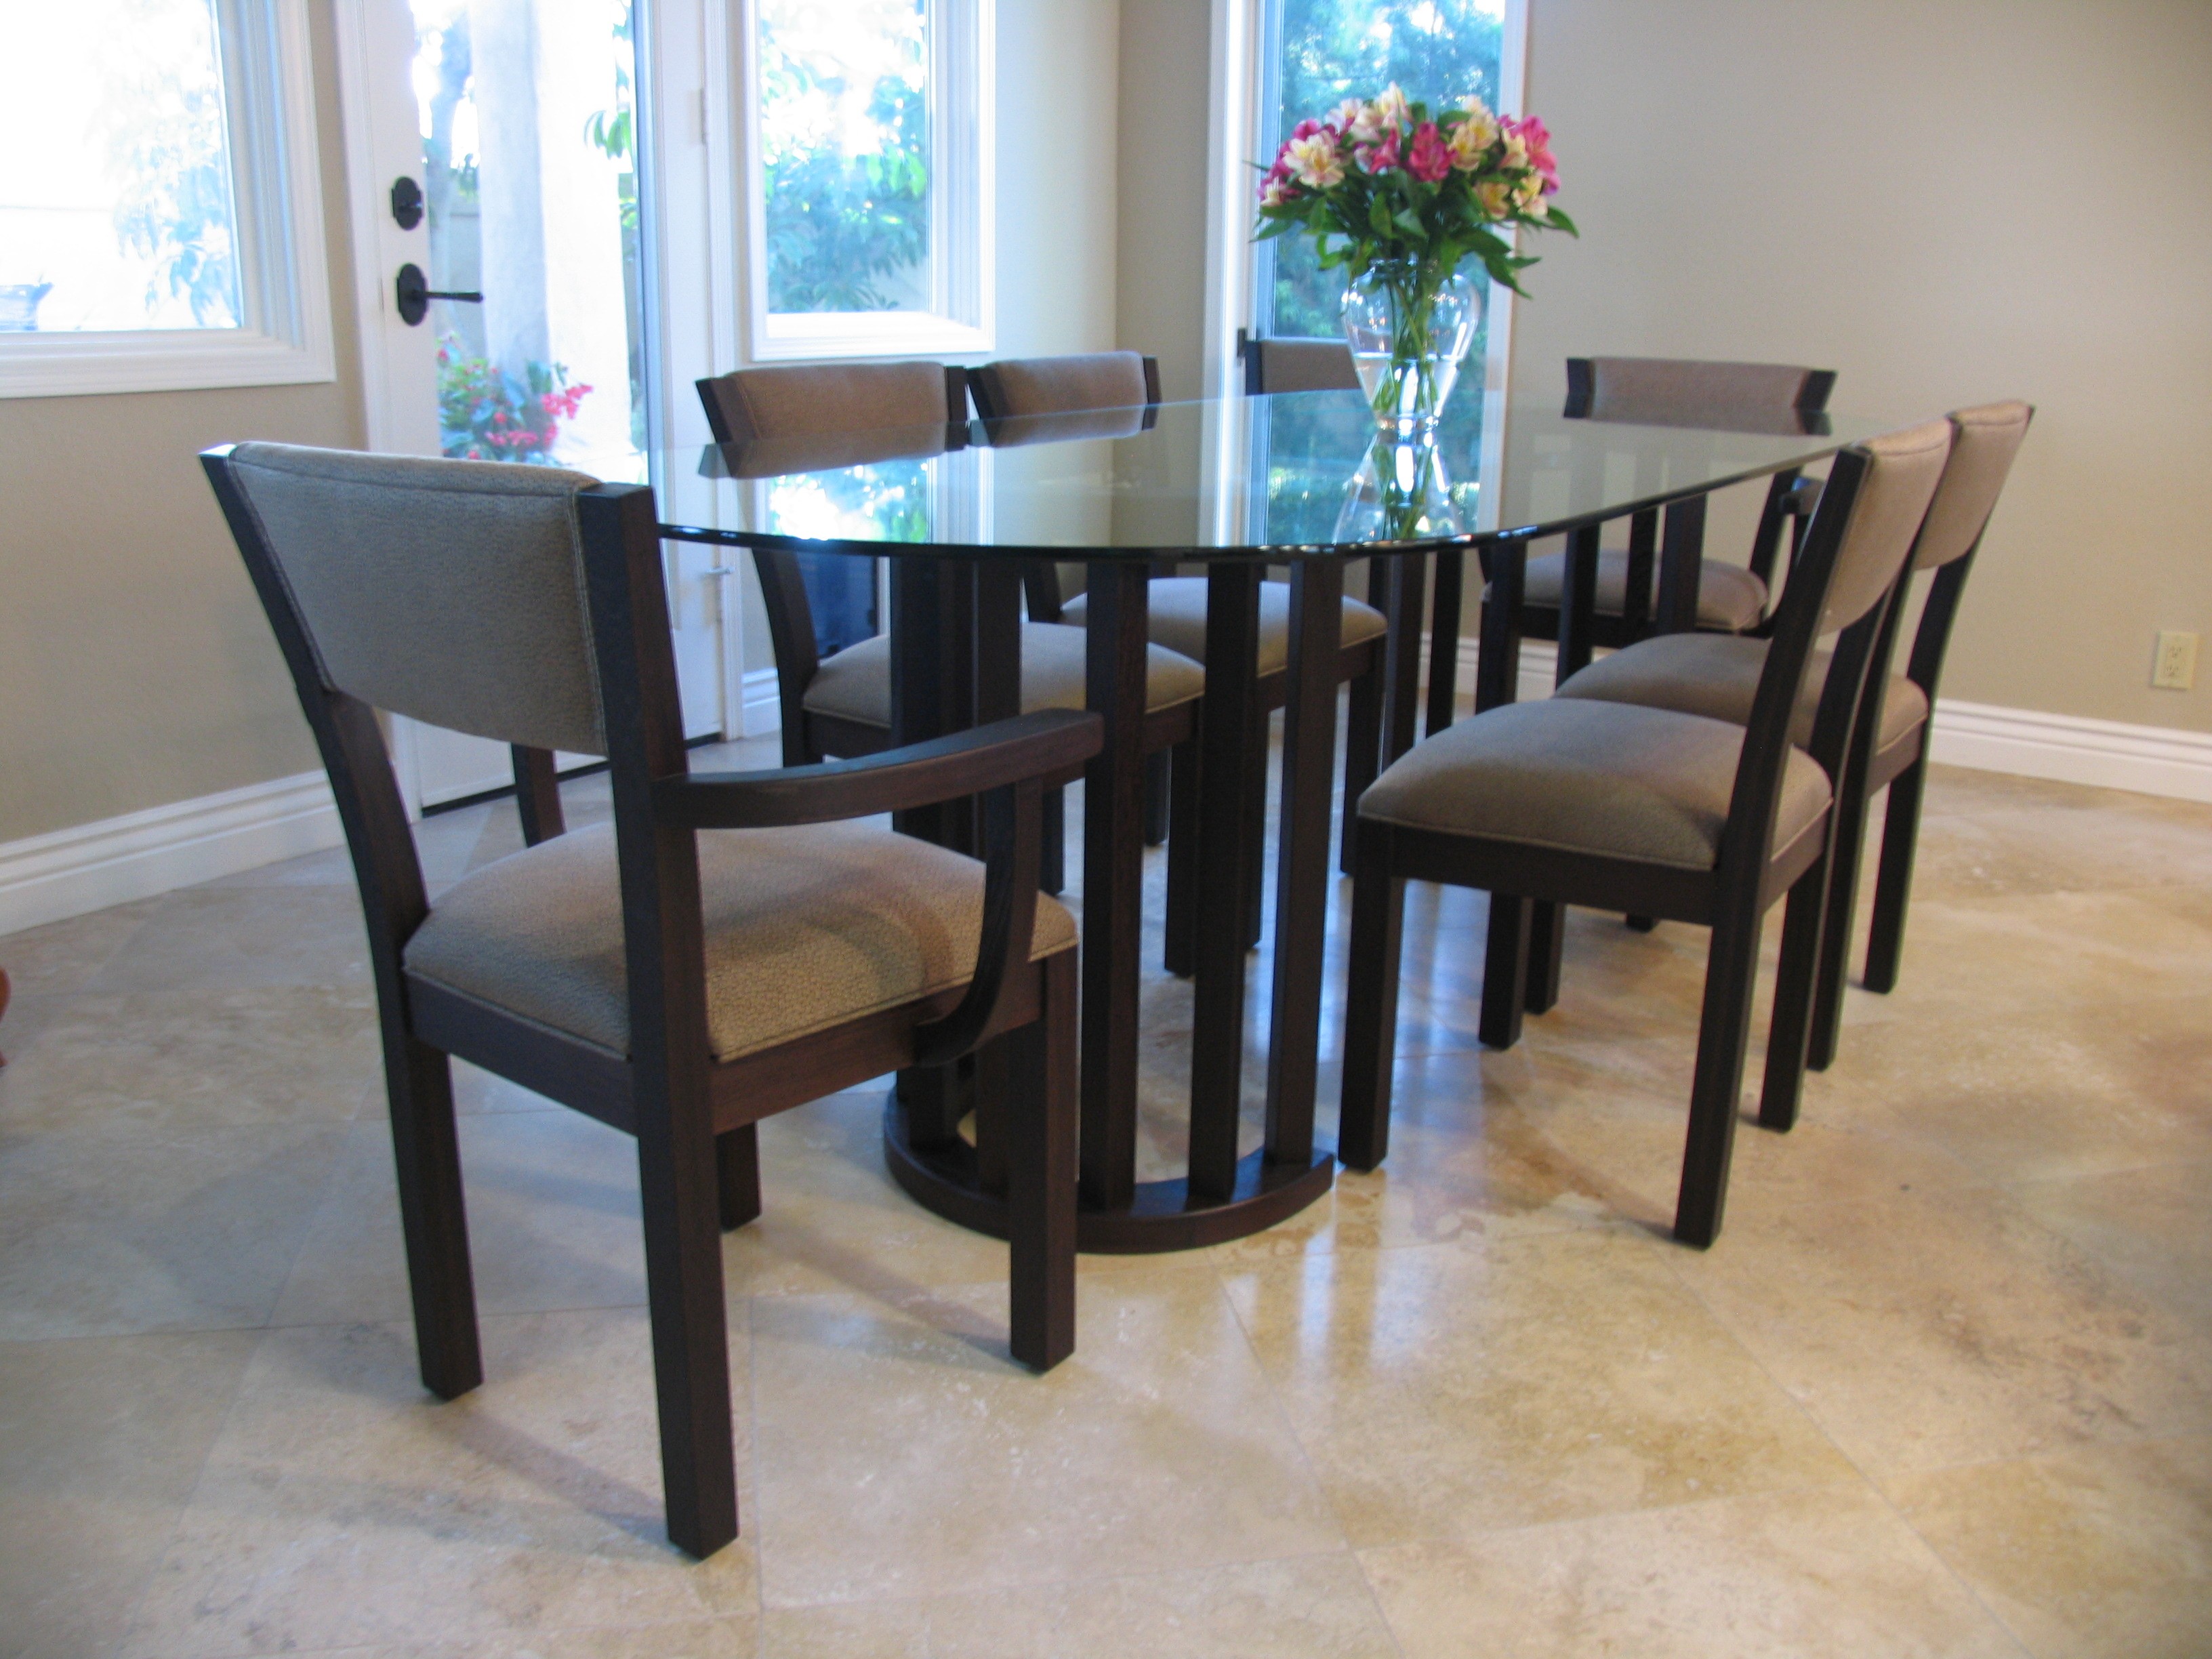 Walnut dining table & chairs (wenge + glass)